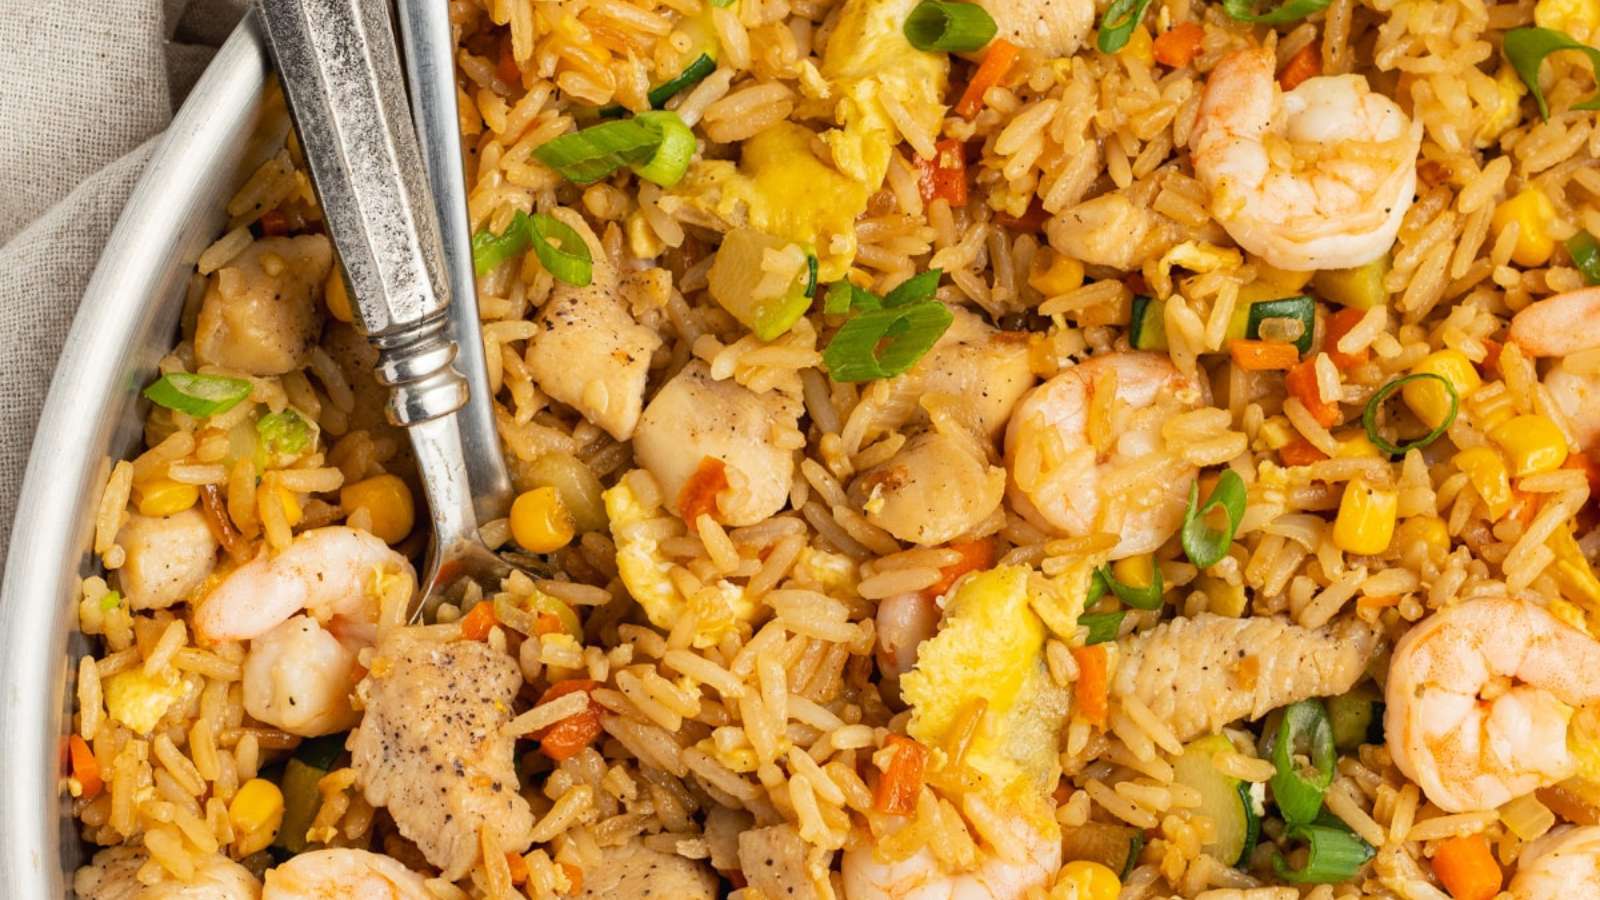 Fried rice with chicken, shrimp and vegetables in a pan.